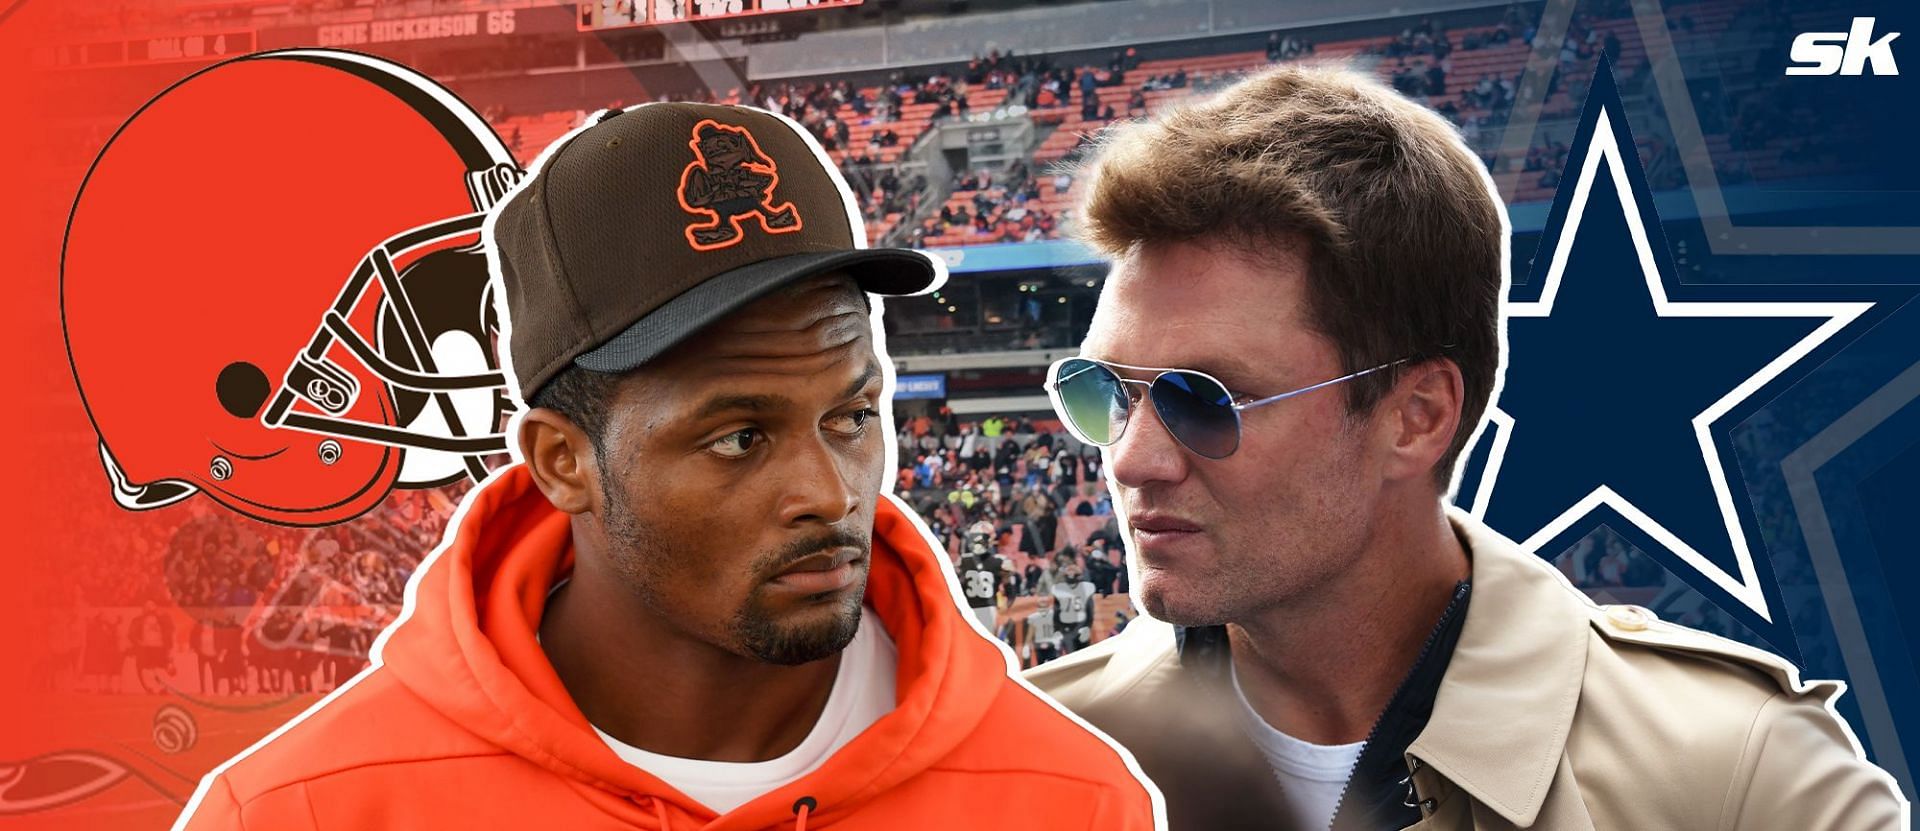 Deshaun Watson makes thoughts clear on Tom Brady kicking off FOX broadcasting deal with Cowboys vs Browns